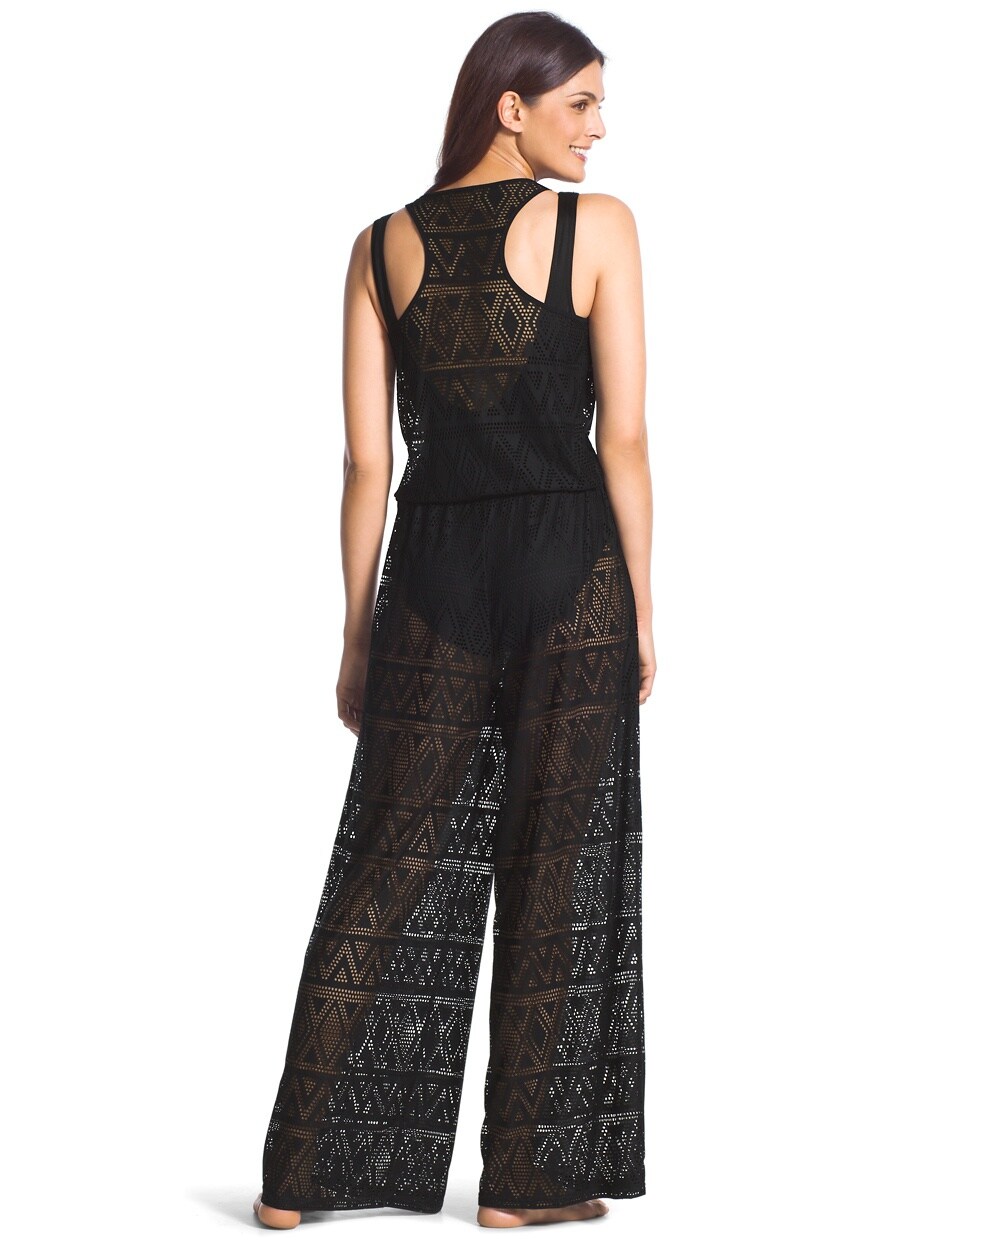 Crocheted Jumpsuit Swim Cover Up - Chicos